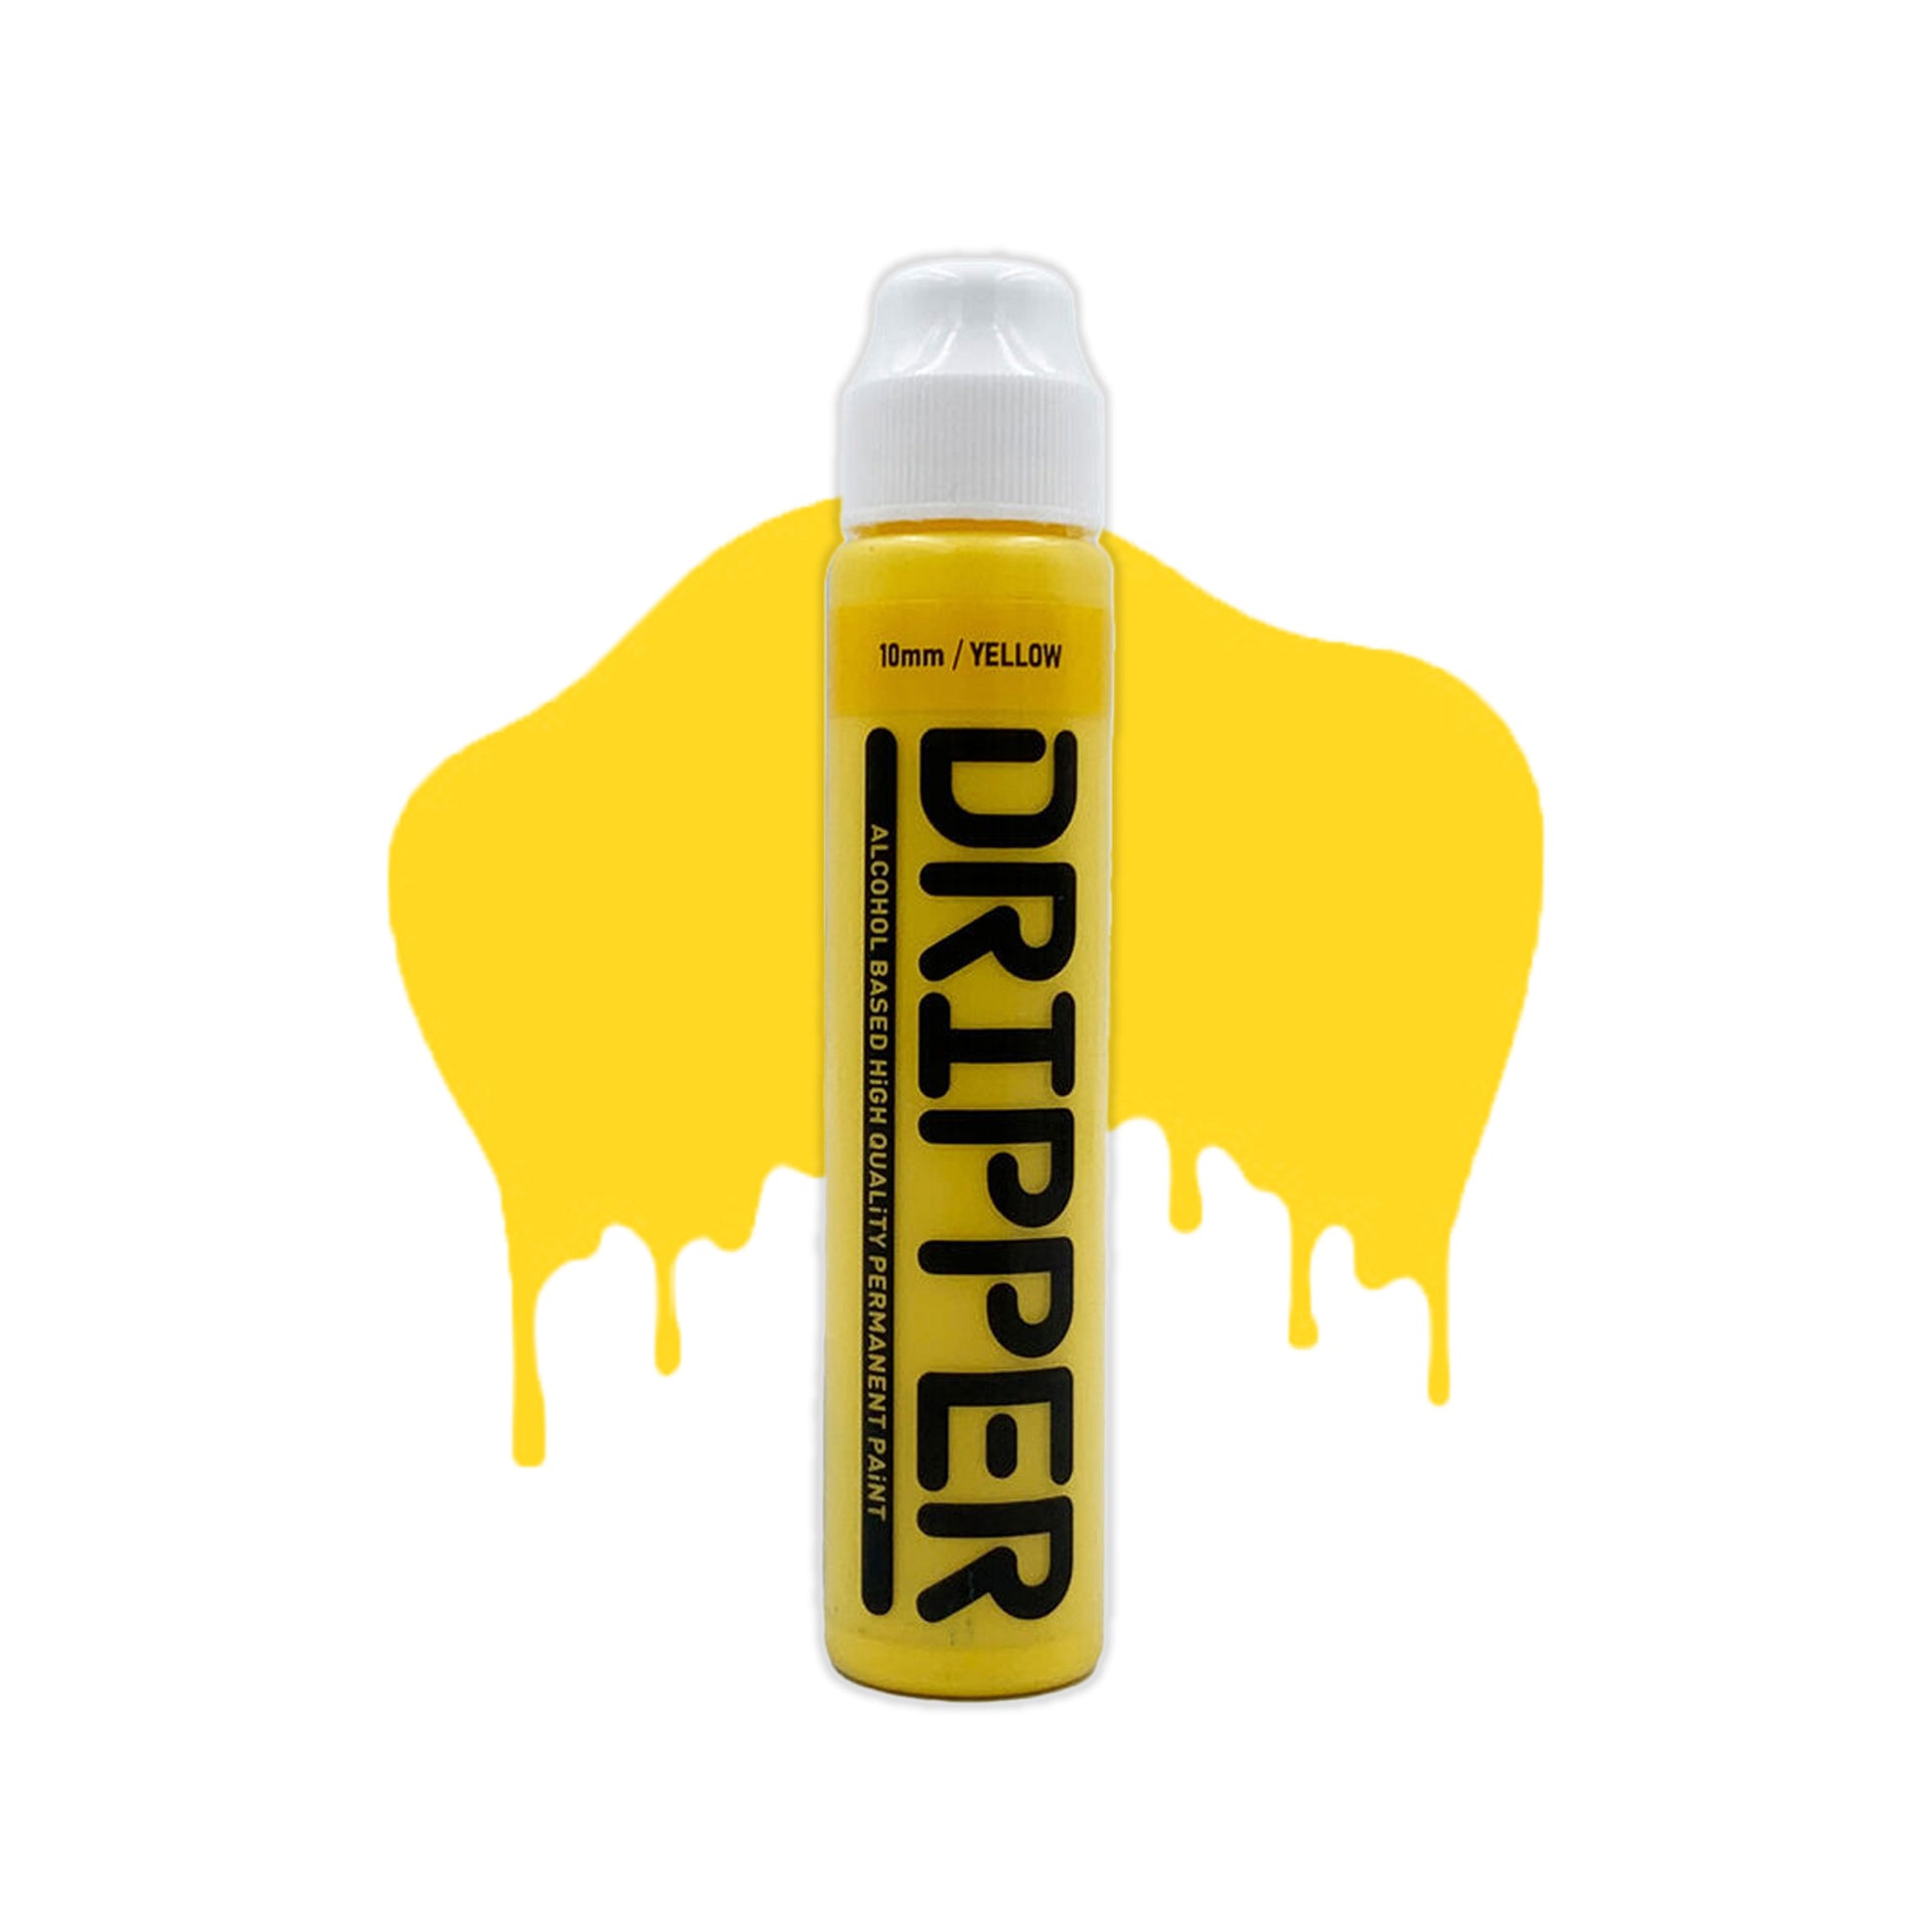 Yellow mop container with white cap and the word "Dripper" written on the face in a bold black font. The mop is positioned in front of a white background with drips that match the Yellow color of the mop.